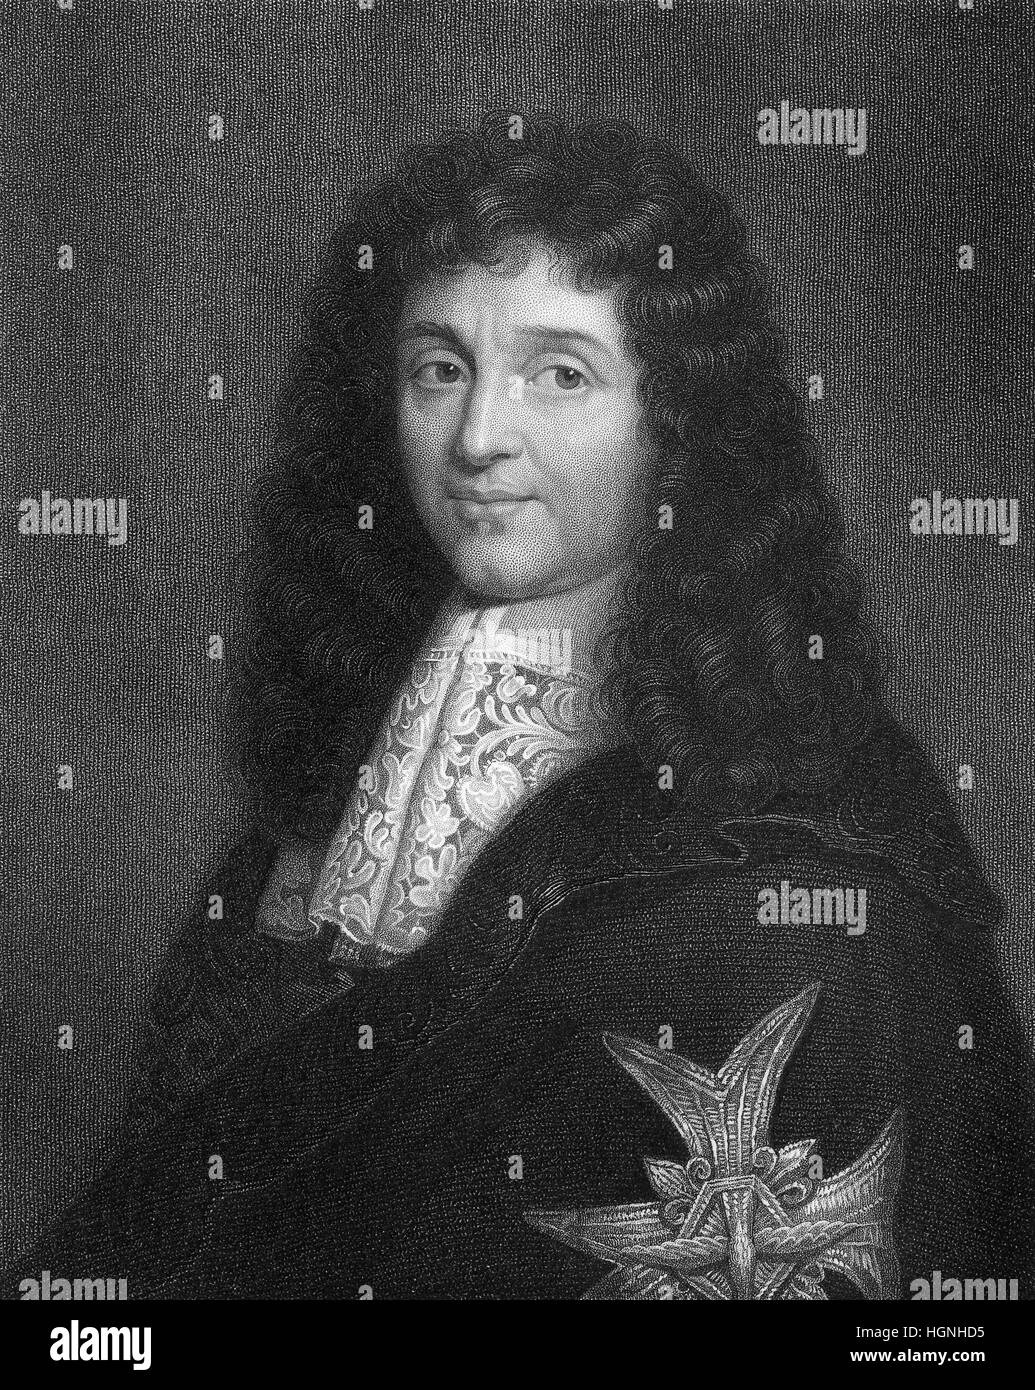 Jean-Baptiste Colbert, Marquis de Seignelay, 1619 - 1683, a French statesman and finance minister, founder of mercantilism or Colbertism Stock Photo